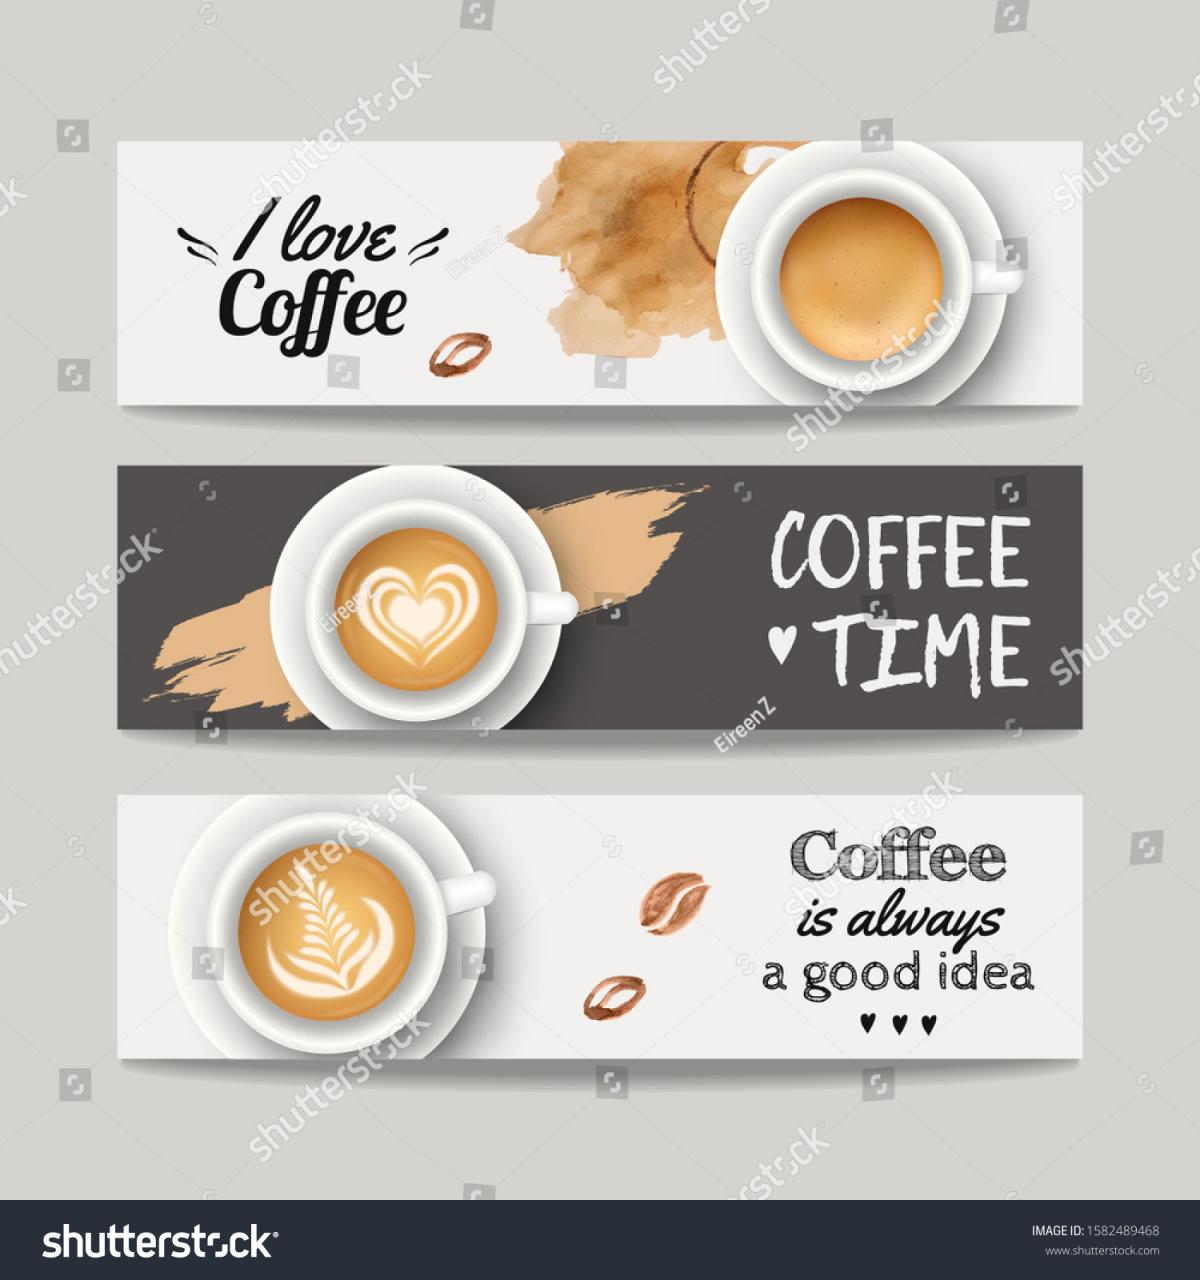 Vector set of modern banners with coffee backgrounds. Trendy templates for flyers, posters, invitations, restaurant or cafe menu design.